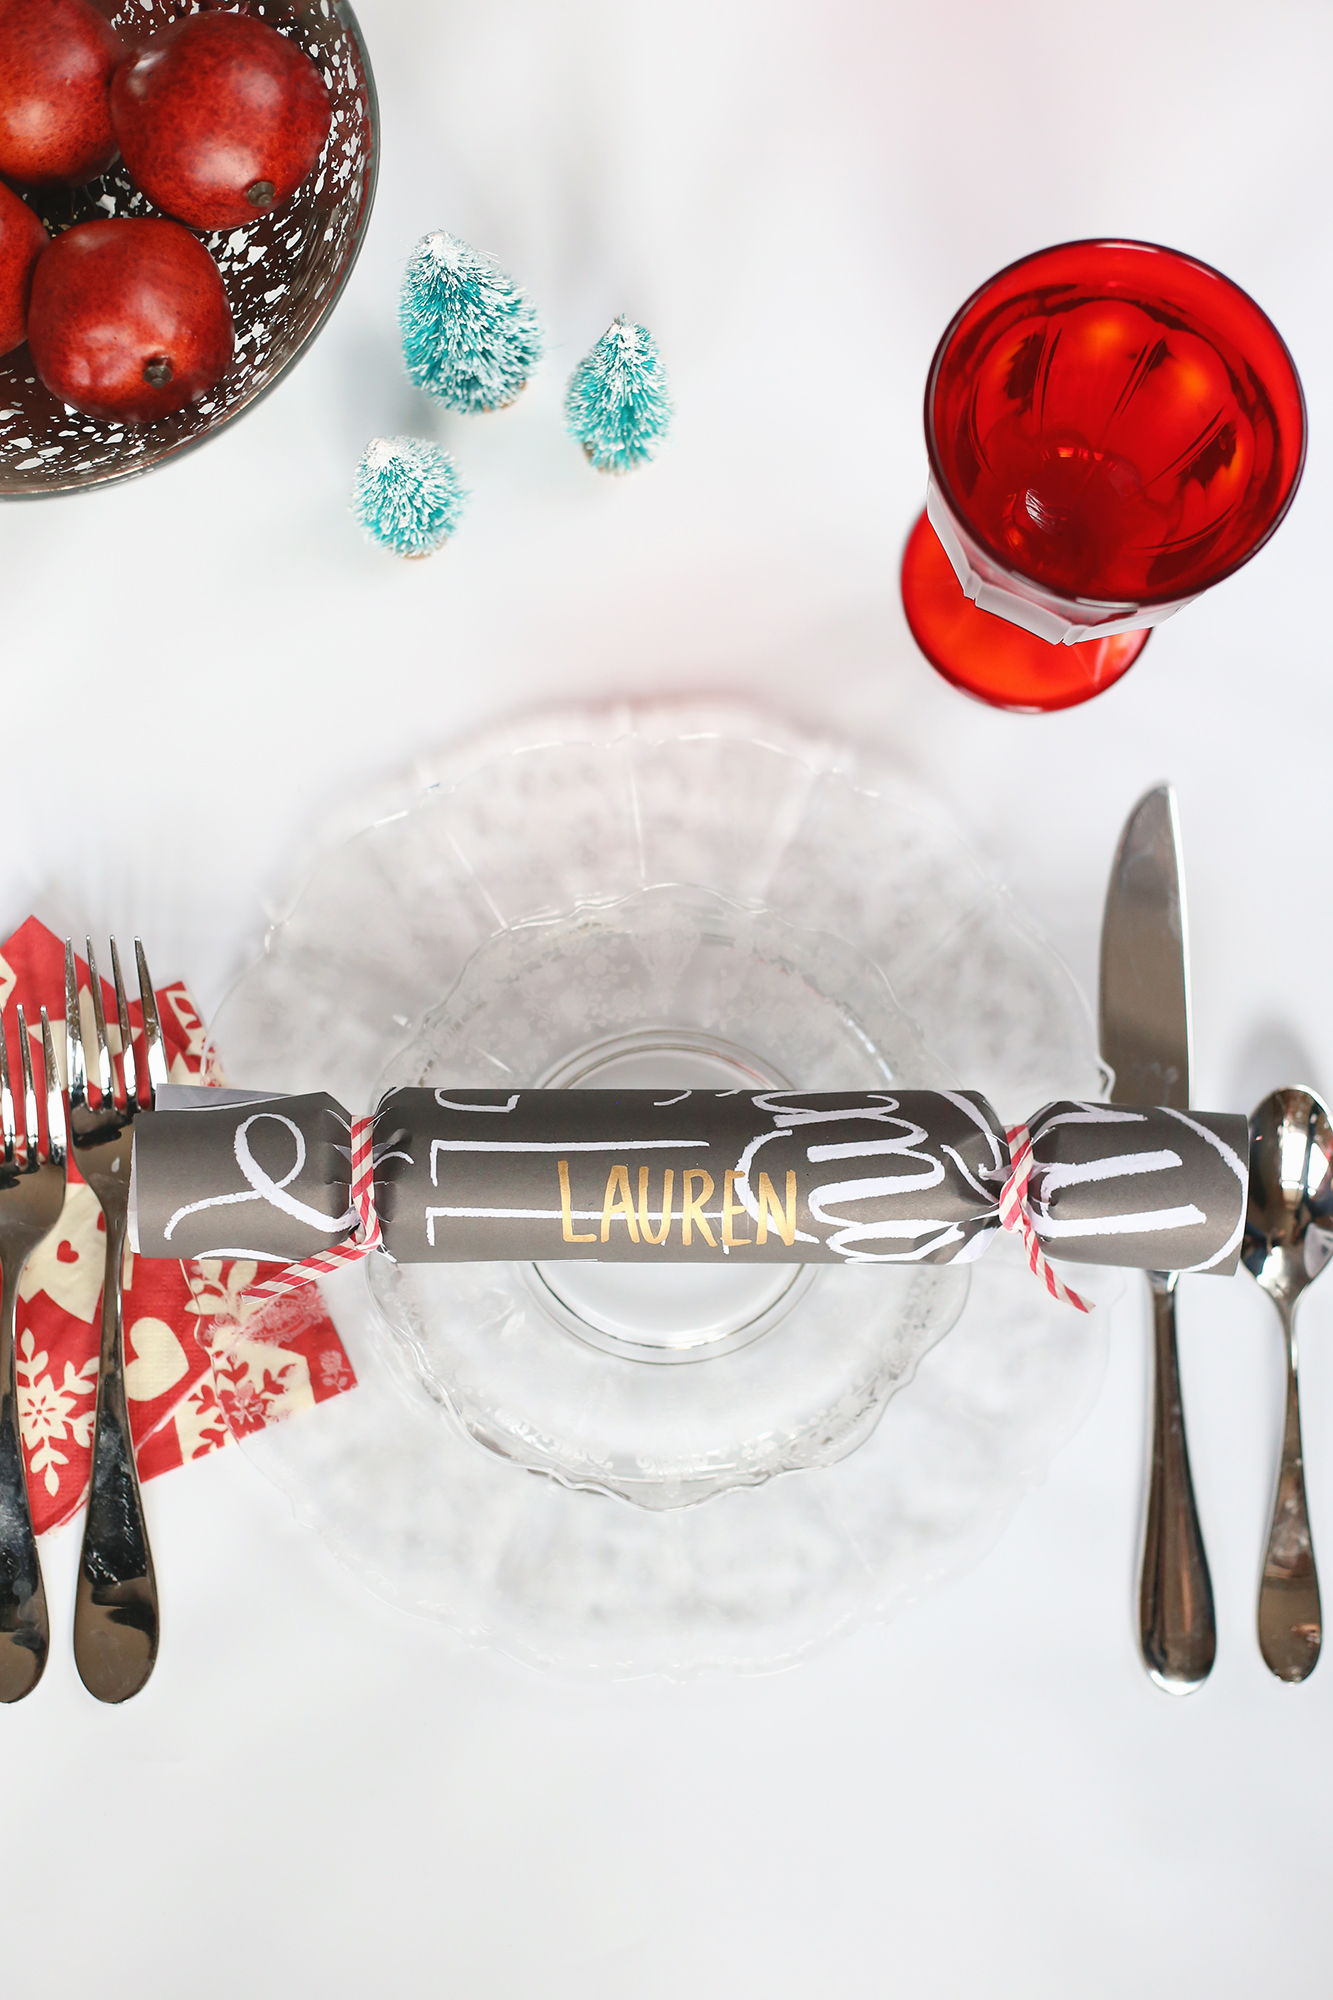 Use your leftover wrapping paper to make your own Christmas poppers! Add some extra festiveness to your holiday tablescapes!